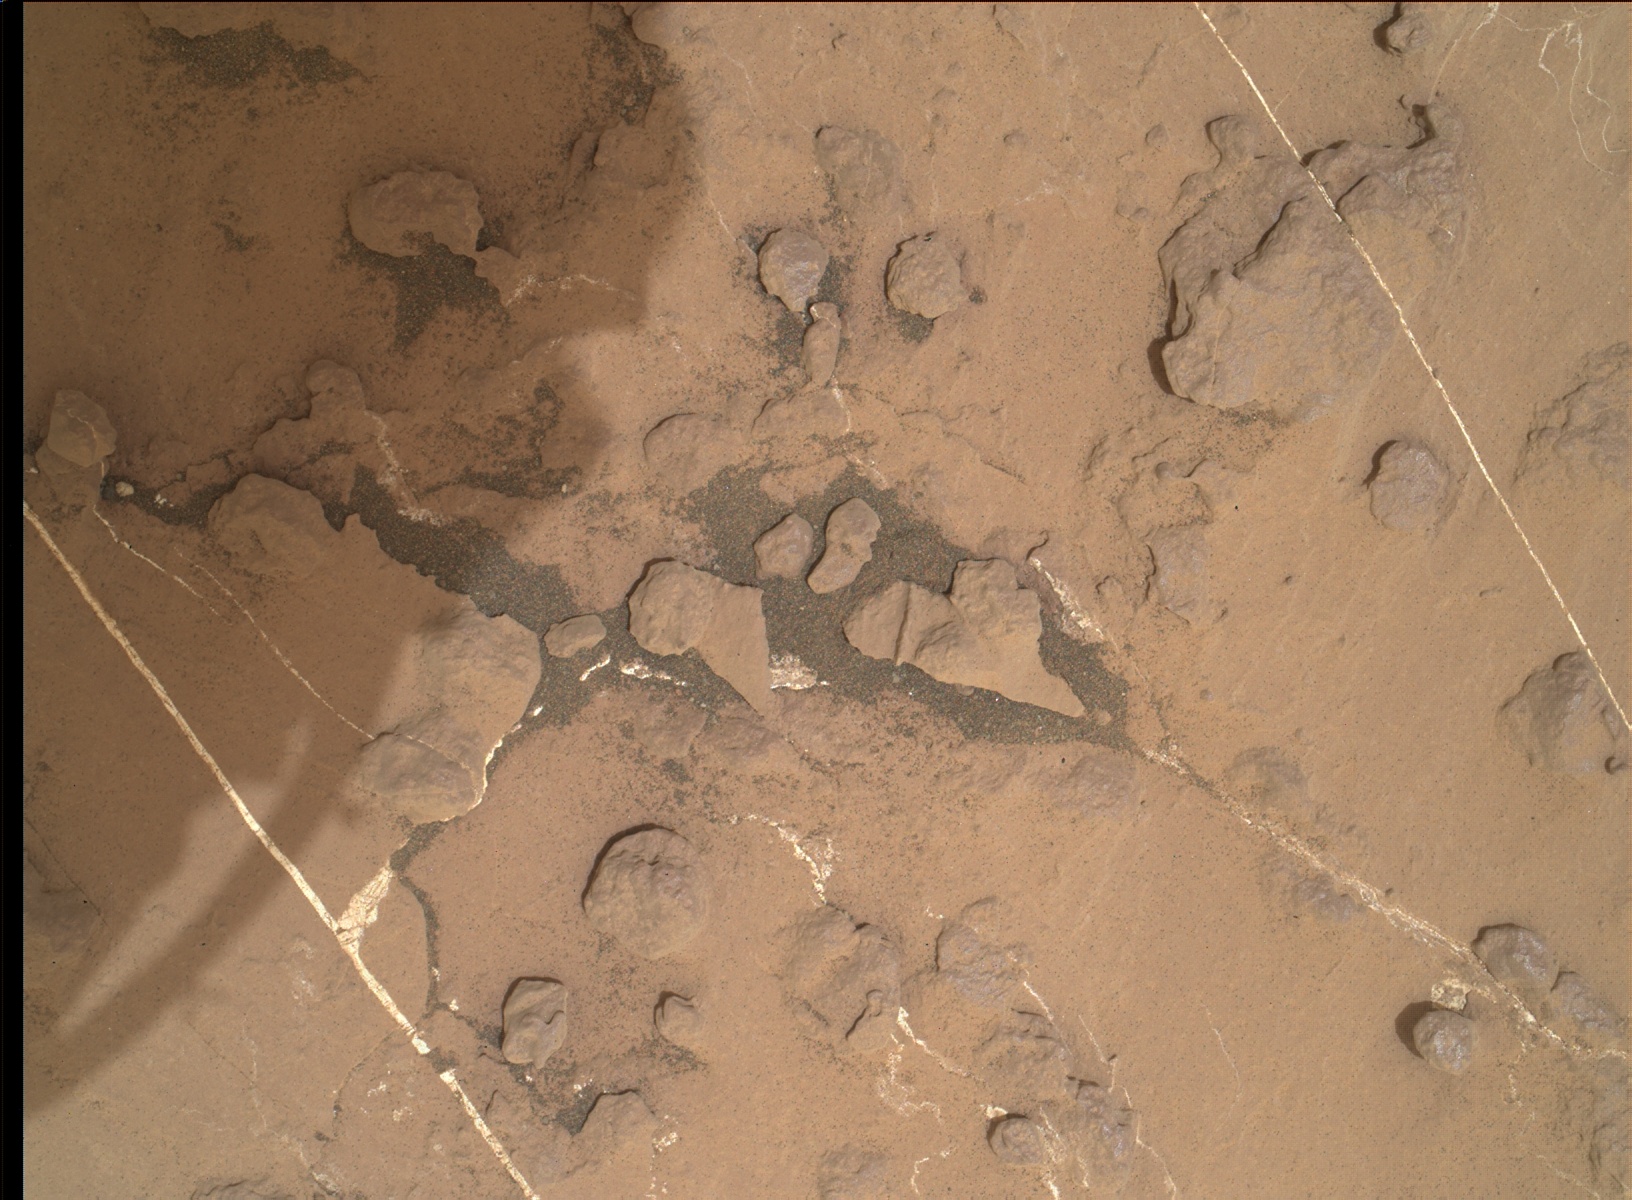 Nasa's Mars rover Curiosity acquired this image using its Mars Hand Lens Imager (MAHLI) on Sol 1480